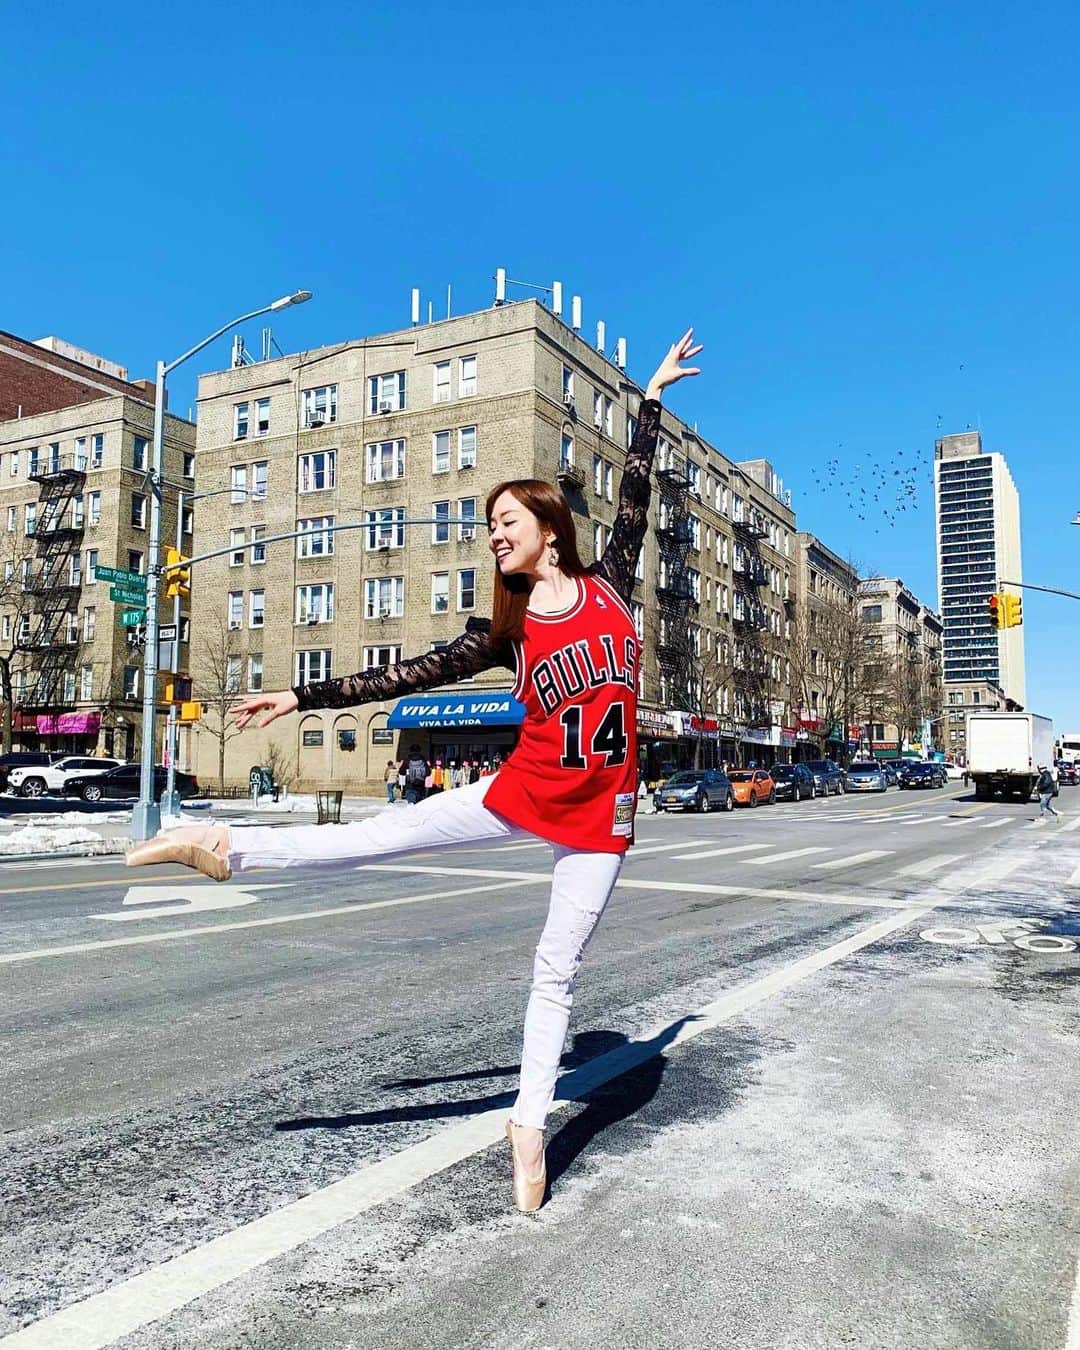 メロディー・モリタさんのインスタグラム写真 - (メロディー・モリタInstagram)「Happy Friday!! It's a week till NBA All-Star 2020 in Chicago🙌 Striking a pose with a throwback Bulls jersey that was gifted to me by @NBA😄🏀 Swipe for behind the scenes of interviewing some of the players at last year's All-Star Weekend!✨ * Nine players will be making their debut as an All-Star this year, so we'll be able to see a great mix of veteran and young players on the court. For the Rising Stars Game, Rui Hachimura will be playing for Team World as the first Japanese player ever! can't wait to see what he'll show on the court🔥 * This year's ASG will be especially be a memorable and heartfelt one for each and every NBA player and fan around the world as we all unite, embrace, and honor Kobe Bryant and his daughter Gianna. * NBAオールスター・ウィークエンド 2020まで、あと1週間‼️ 今回はシカゴで開催という事で、NBAから頂いたブルズのスローバック・ジャージーを着てバレエポーズ✨ * 今年のオールスターゲームは全メンバー24人のうち初出場の選手が9人！ベテラン選手と若手選手のバランスが良く、世代の融合が見られます。 * ライジングスター戦には、Team Worldに史上初の日本人プレイヤー八村累選手が出場します。彼の素晴らしいプレーに大注目です！ * そして今年は、コービー・ブライアントさん、ジアーナちゃんたちをhonorする特別なフォーマットで試合が行われ、選手＆ファンの一人ひとりがたくさんの想いを抱きながらの大切なオールスターゲームとなります。 #NBA #NBAAllStar #courtside #interviews #MelodeeMoritaballet」2月8日 10時32分 - melodeemorita